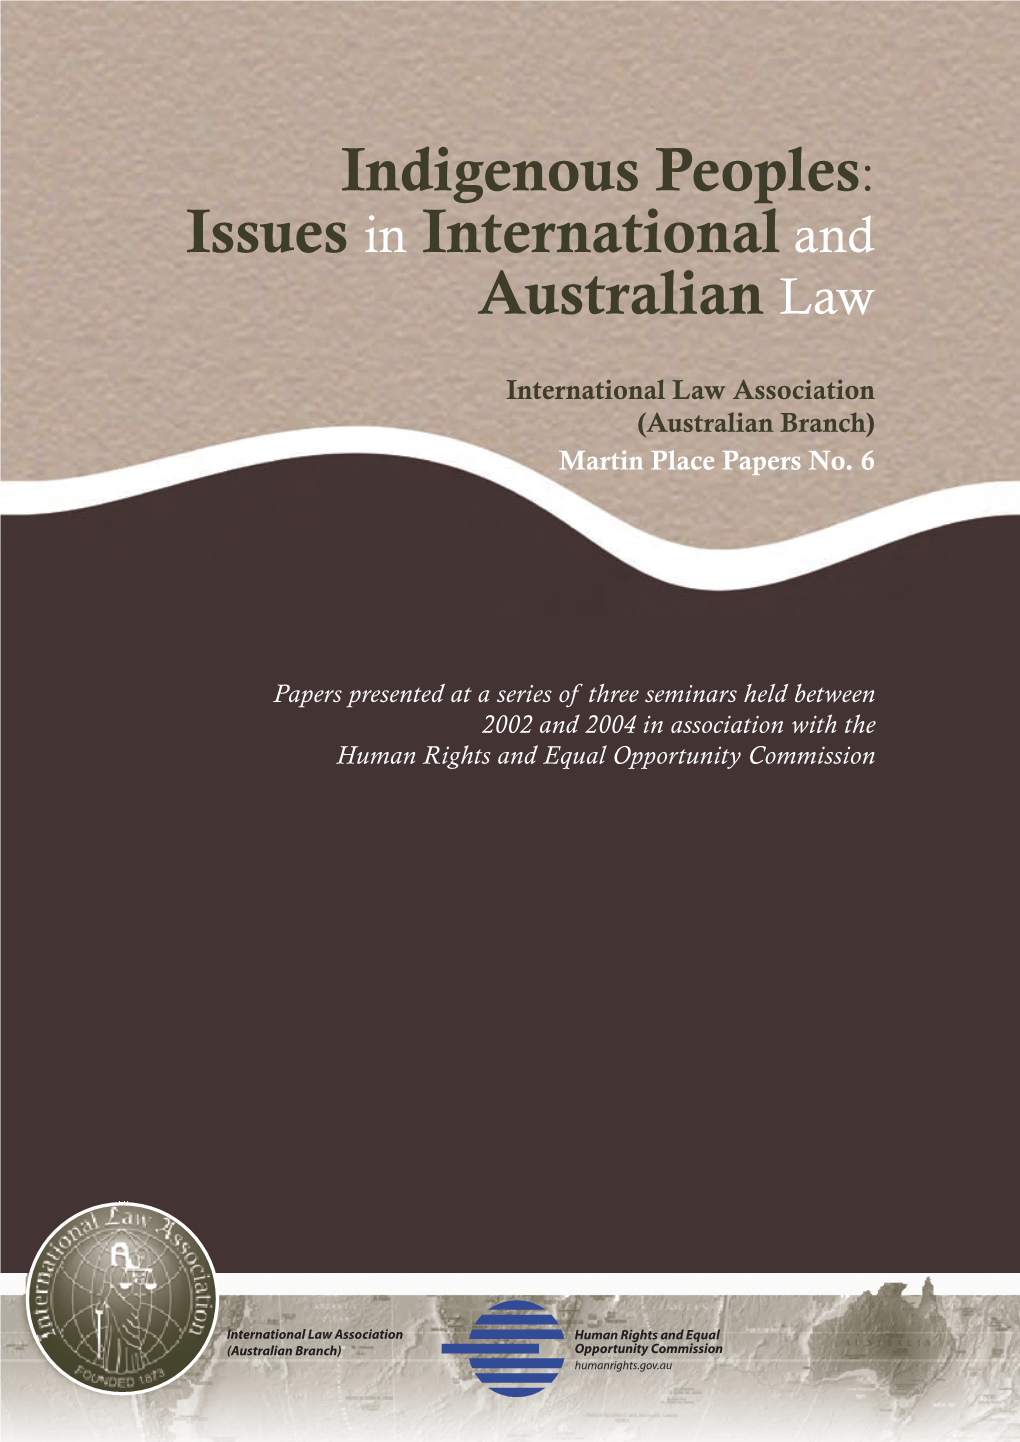 Indigenous Peoples: Issues in International and Australian Law